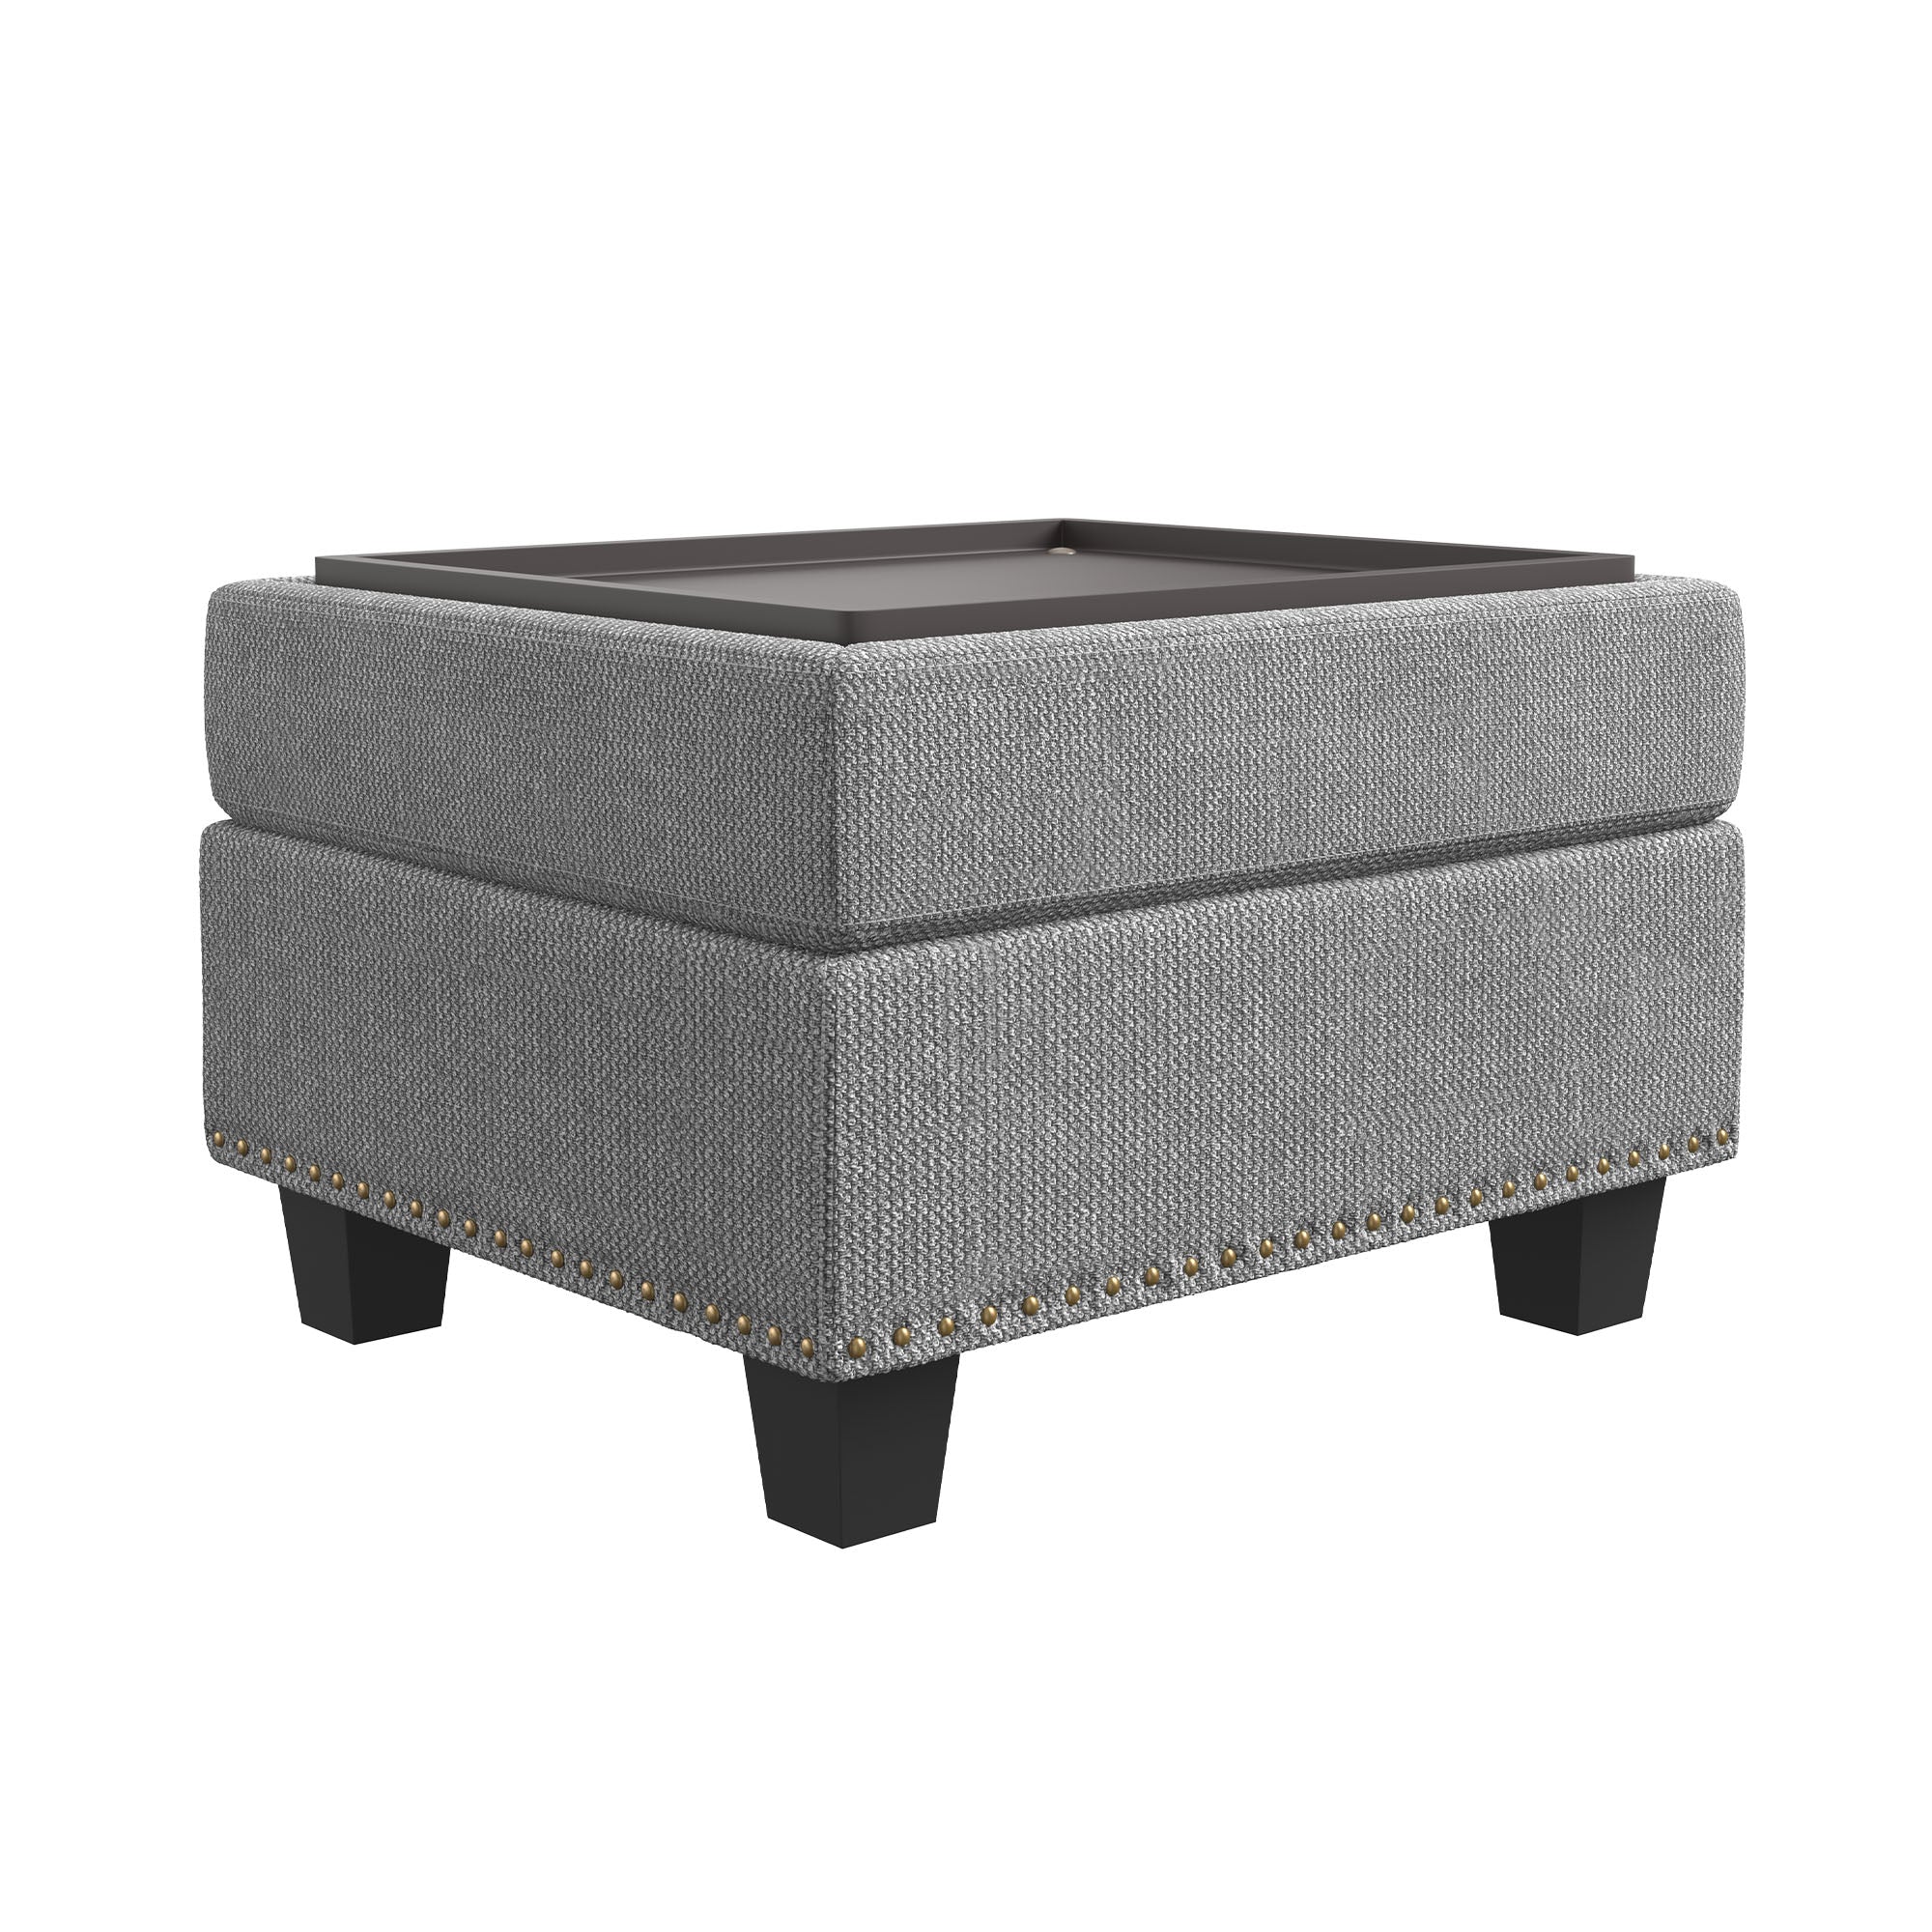 HONBAY Polyester Tray Ottoman with Storage Space